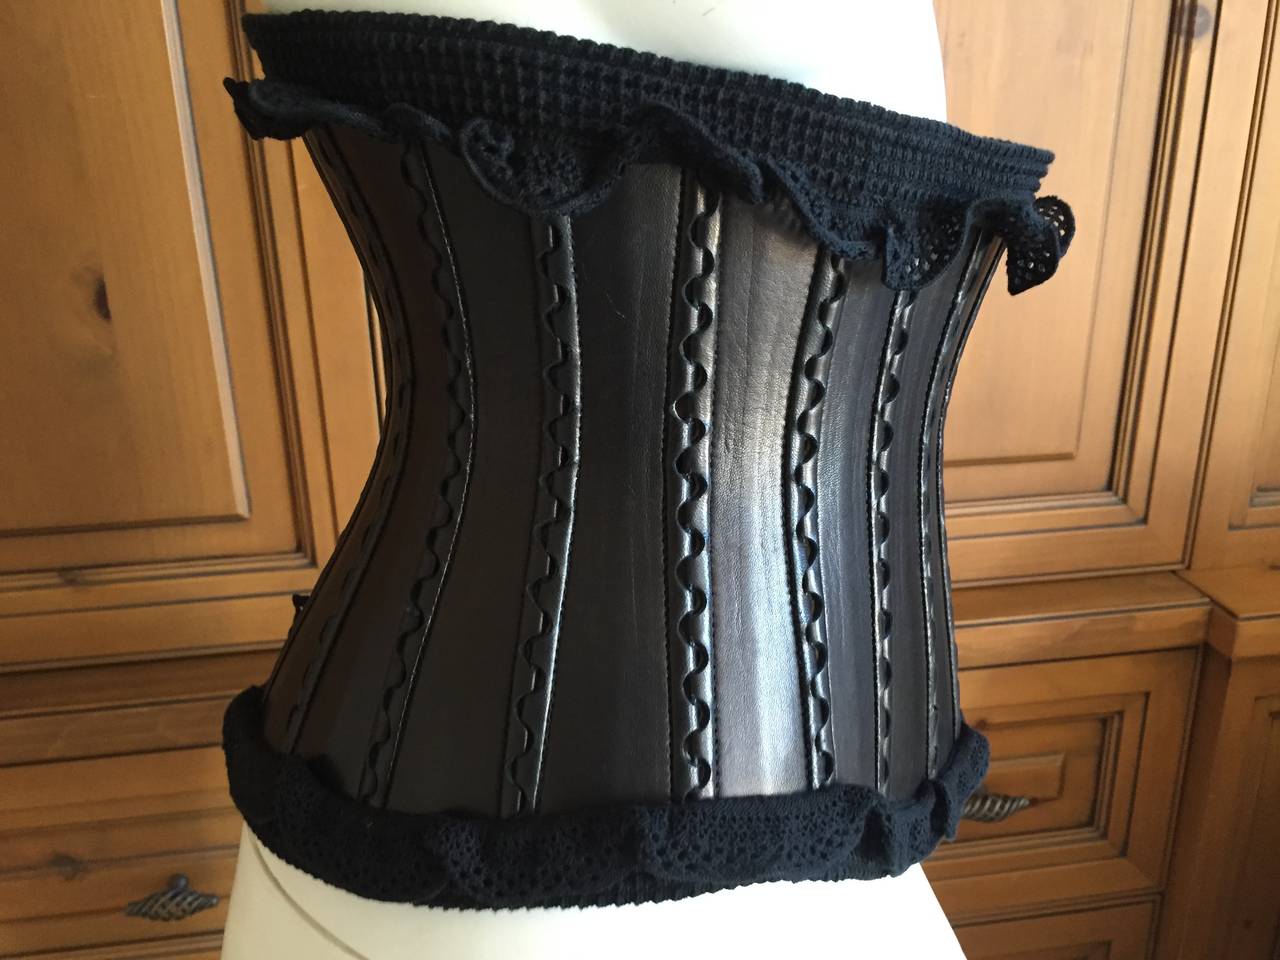 Azzedine Alaia iconic wide black corset belt 
Black leather with macrame ruddle at top and bottom
This is from Fall 2007, made in France

                                sz 40

will fit  25